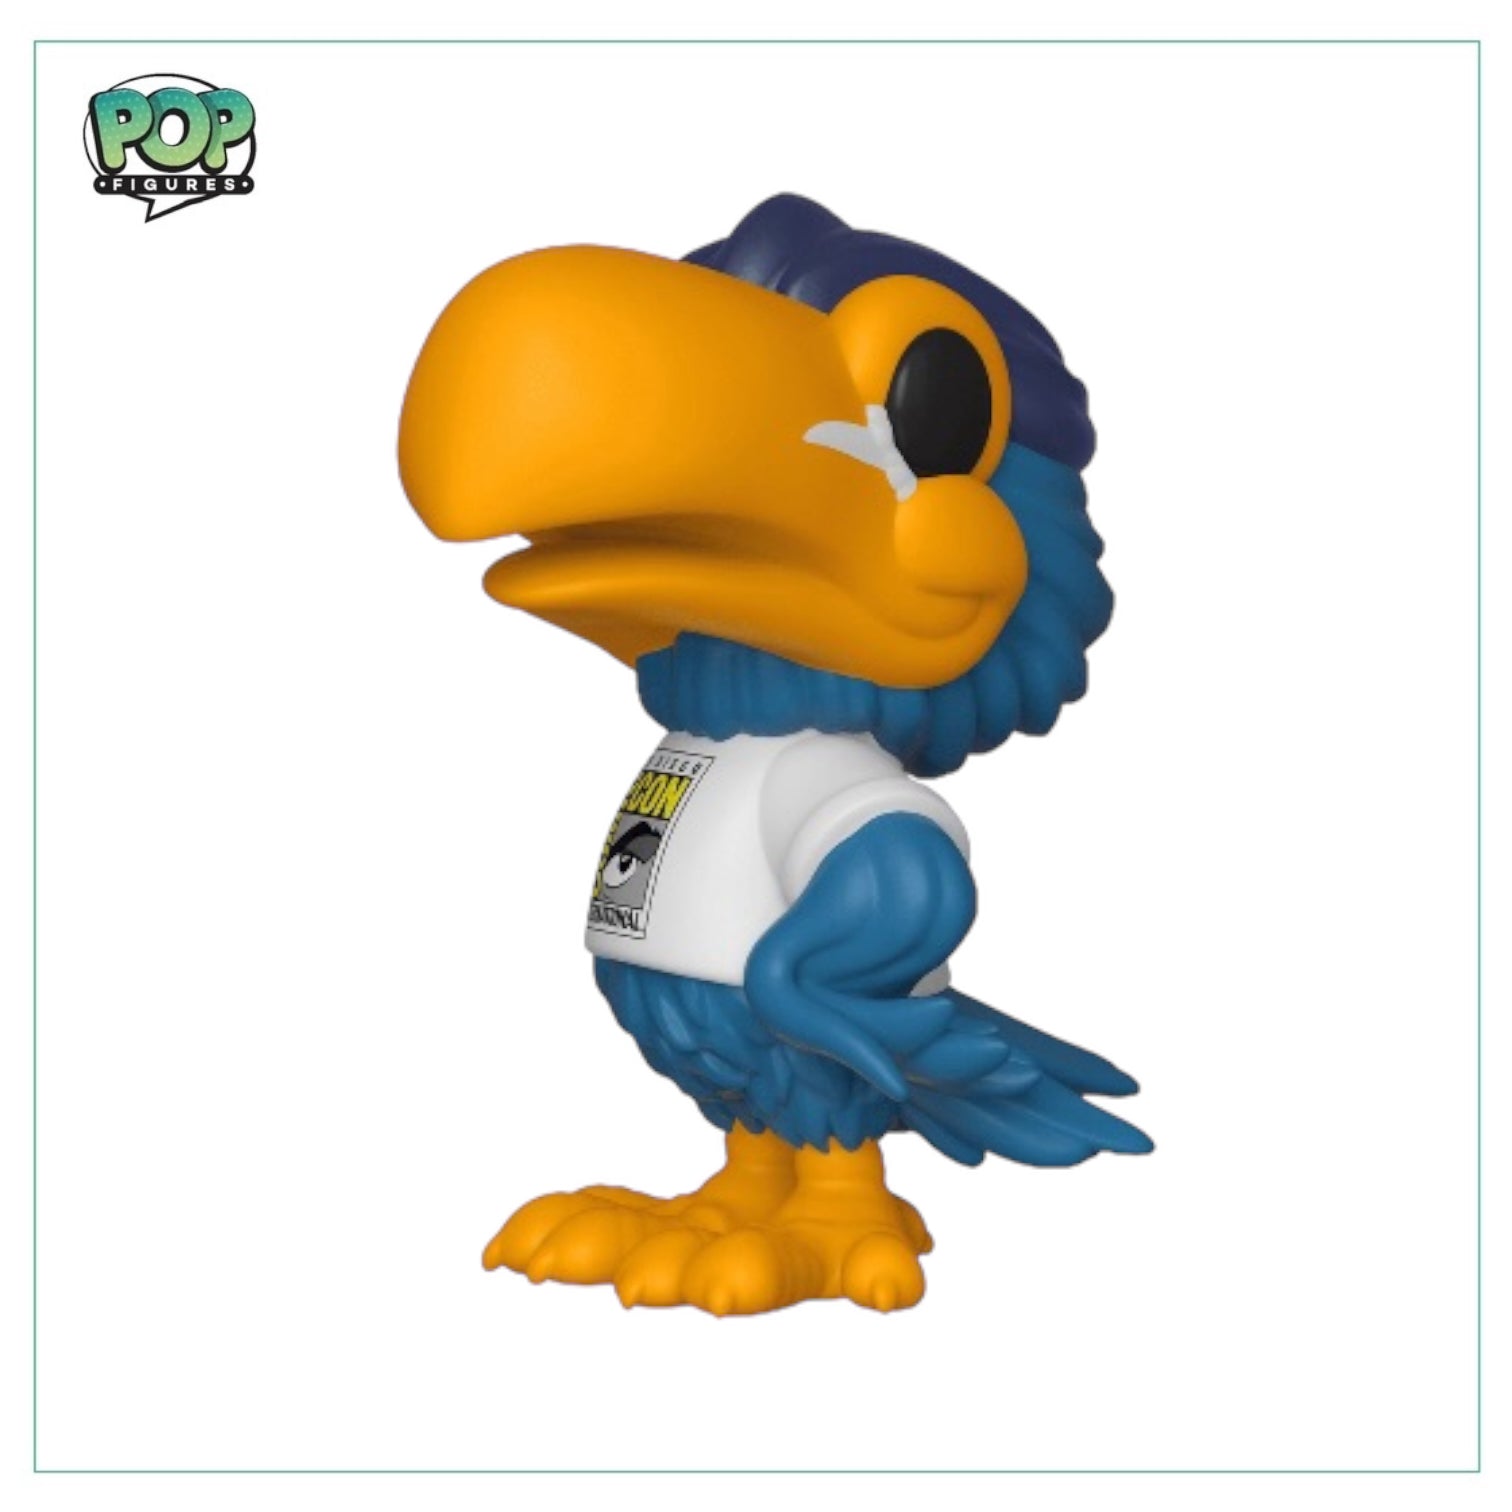 Toucan #53 Funko Pop! - 2019 SDCC Shared Exclusive - 2019 Pop - Condition 9/10